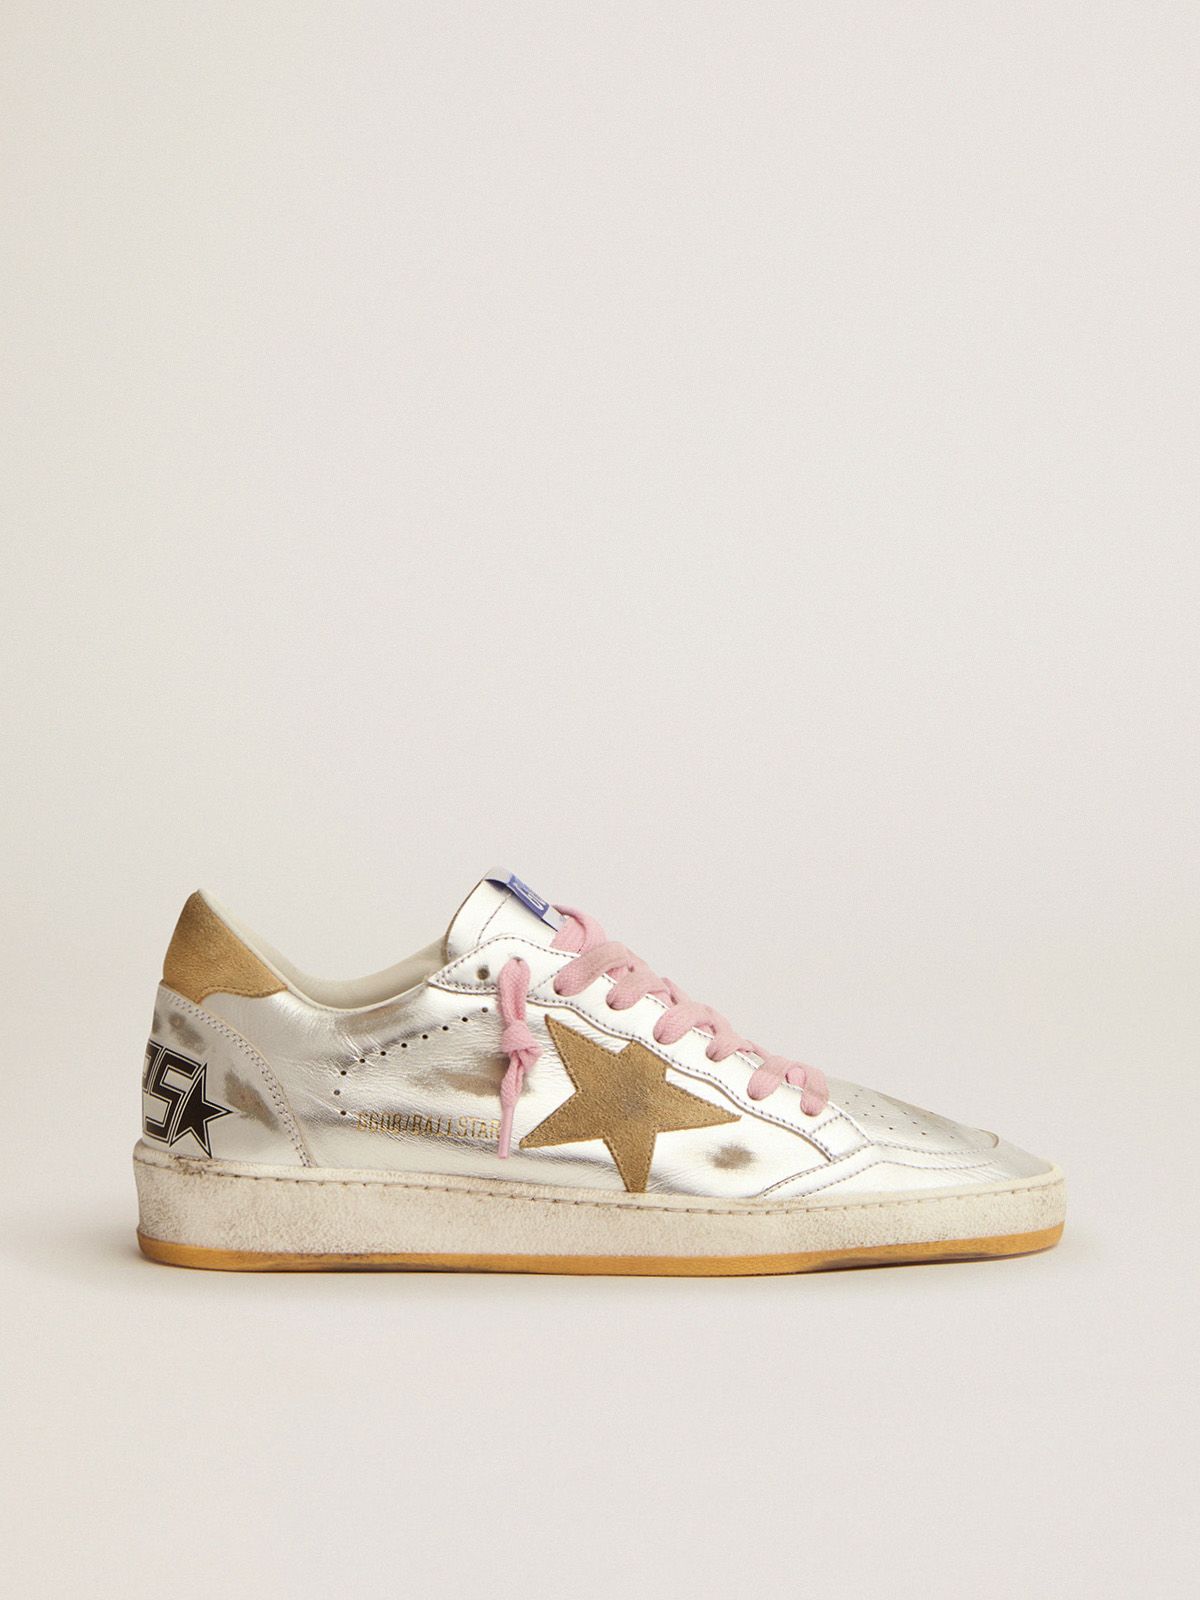 Ball Star LTD sneakers in silver laminated leather with sand-colored suede details